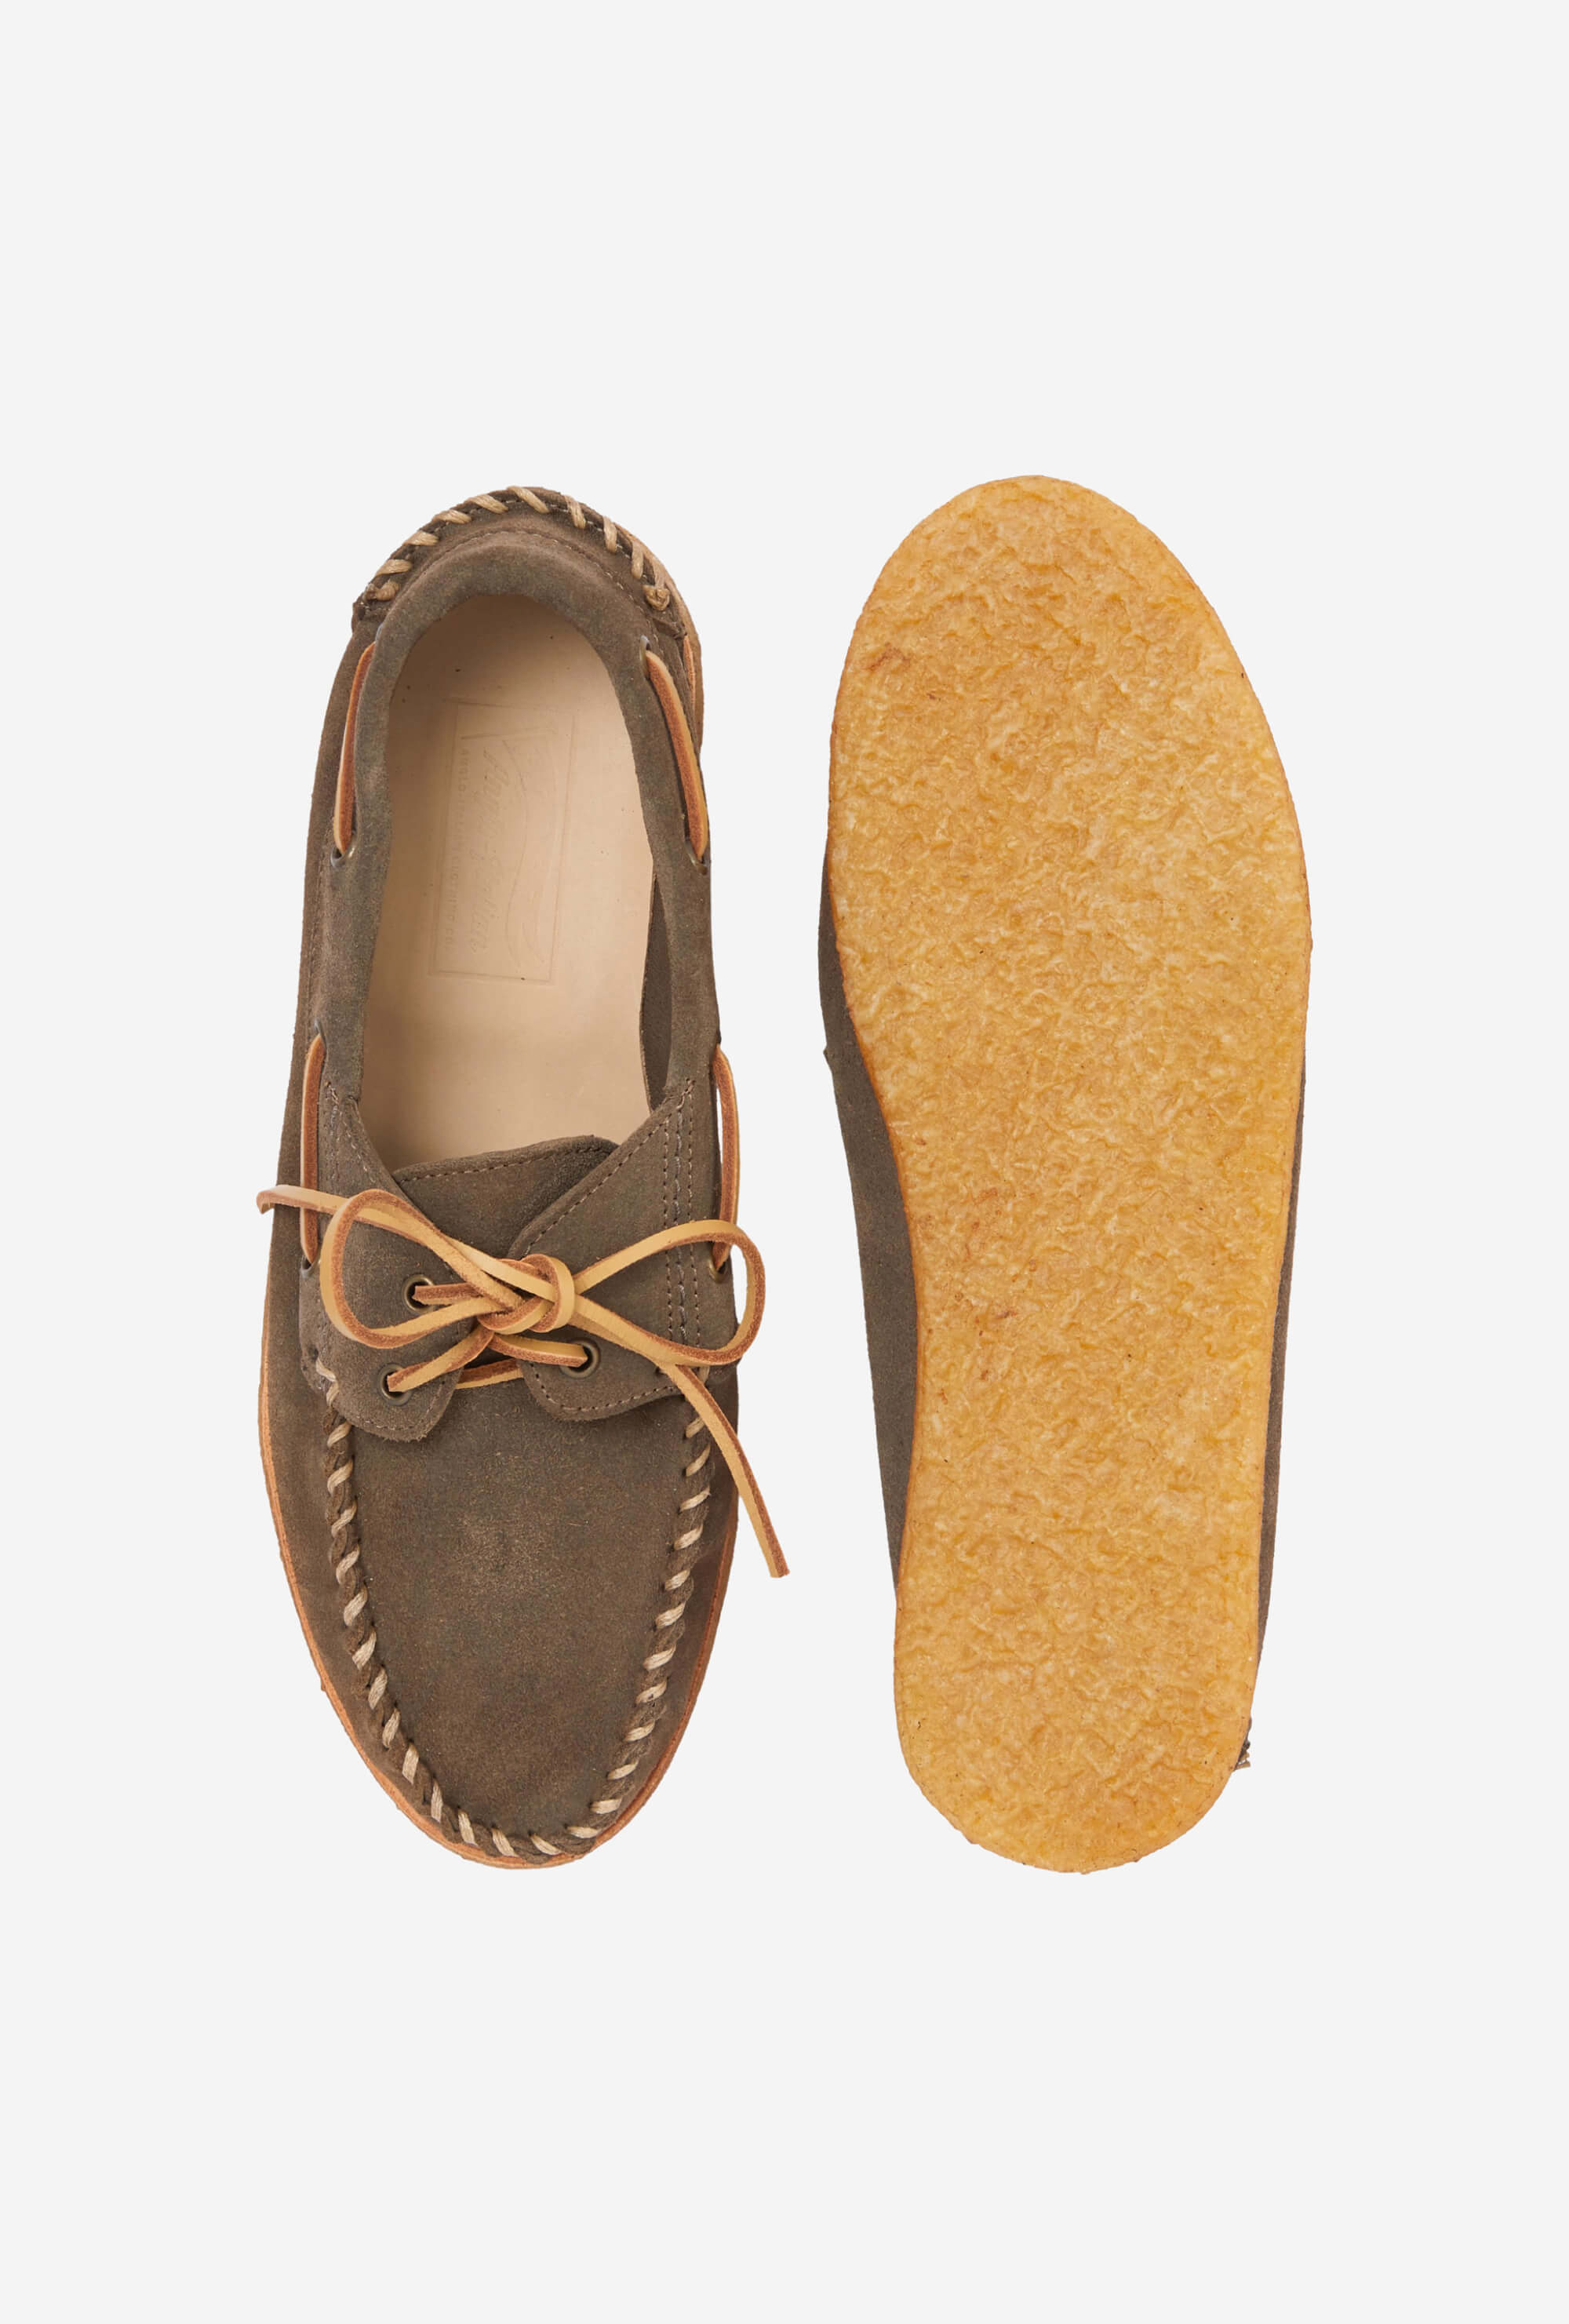 Made-To-Order Boat Shoes